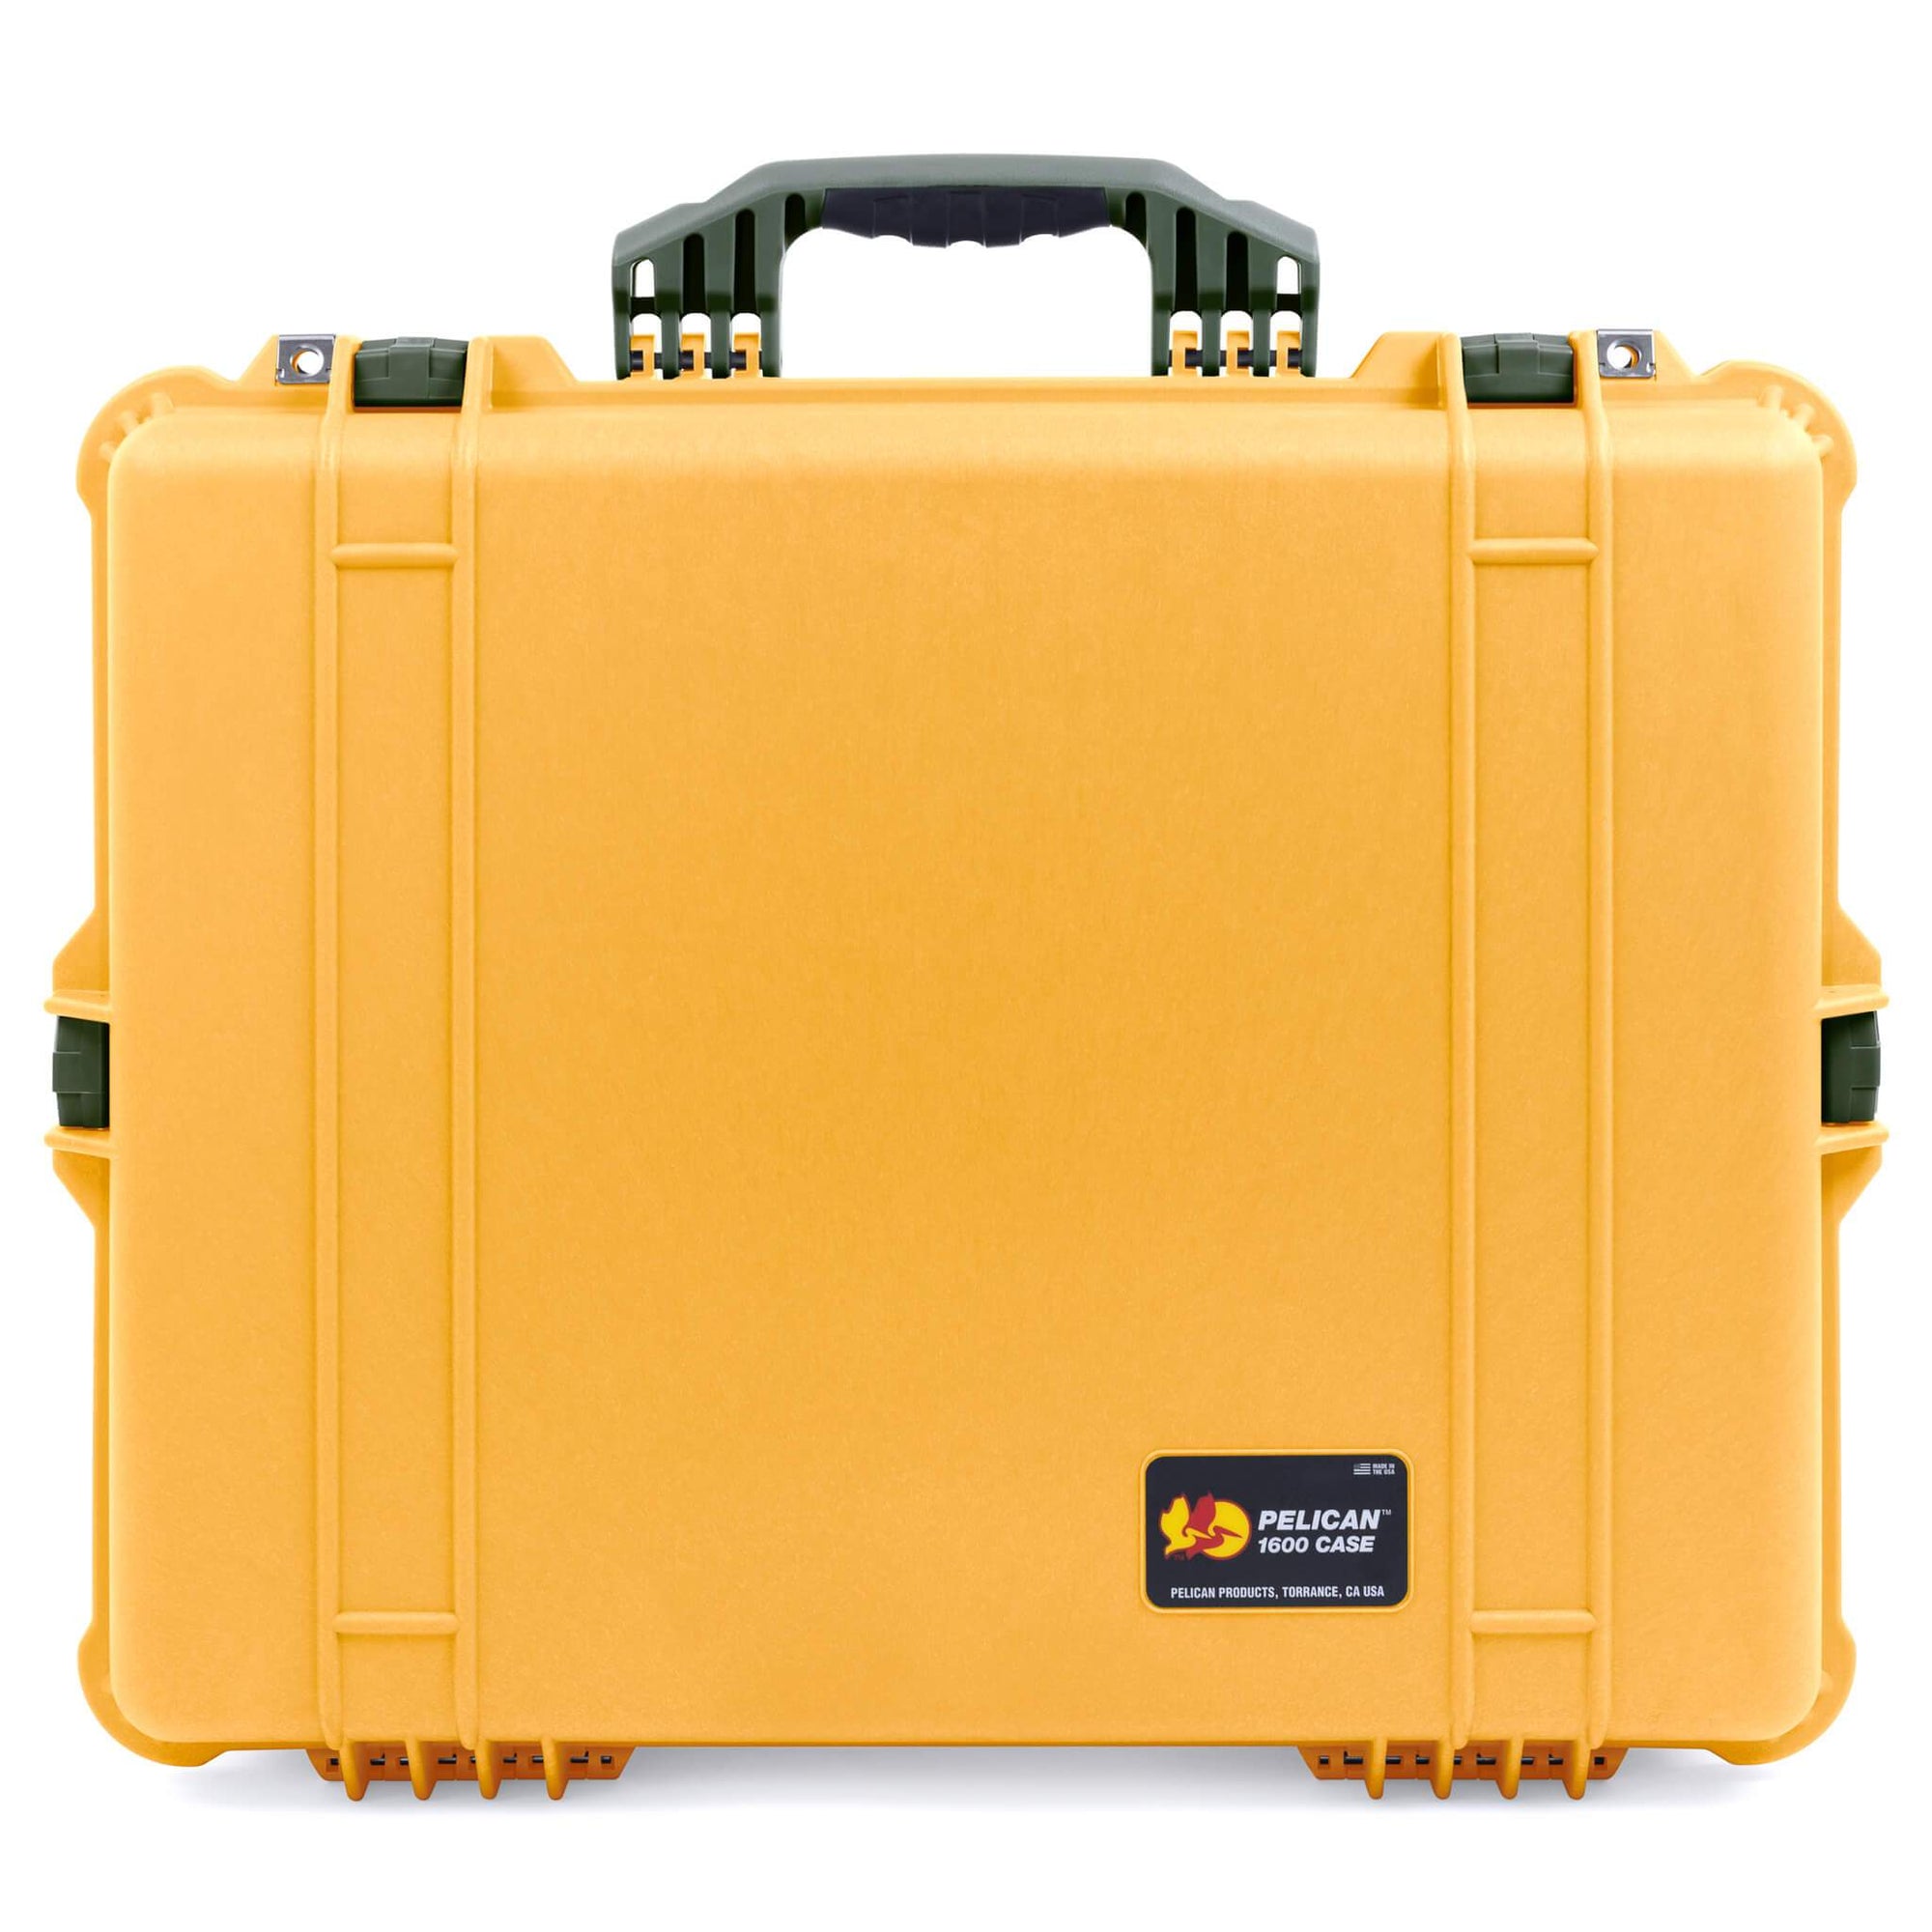 Pelican 1600 Case, Yellow with OD Green Handle & Latches ColorCase 